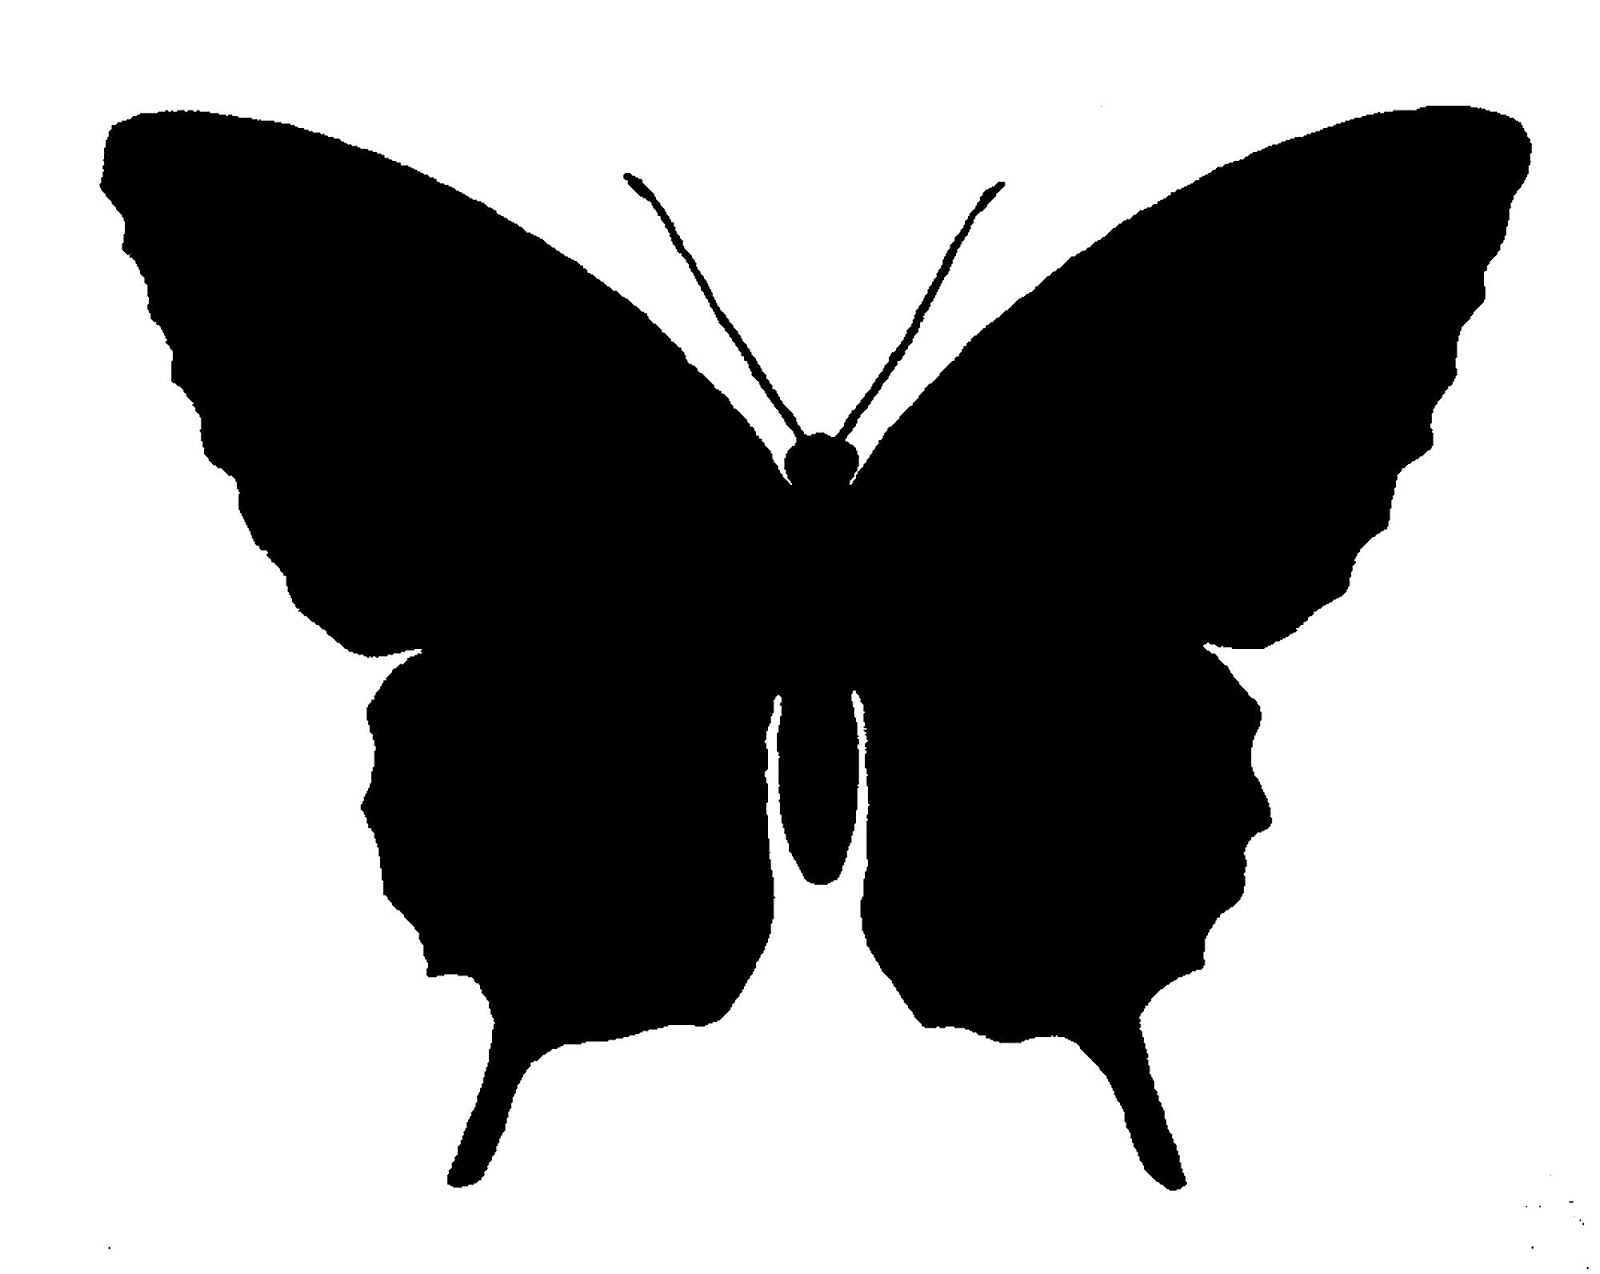 Download The Graphics Monarch: Free Butterfly Silhouette Image ...